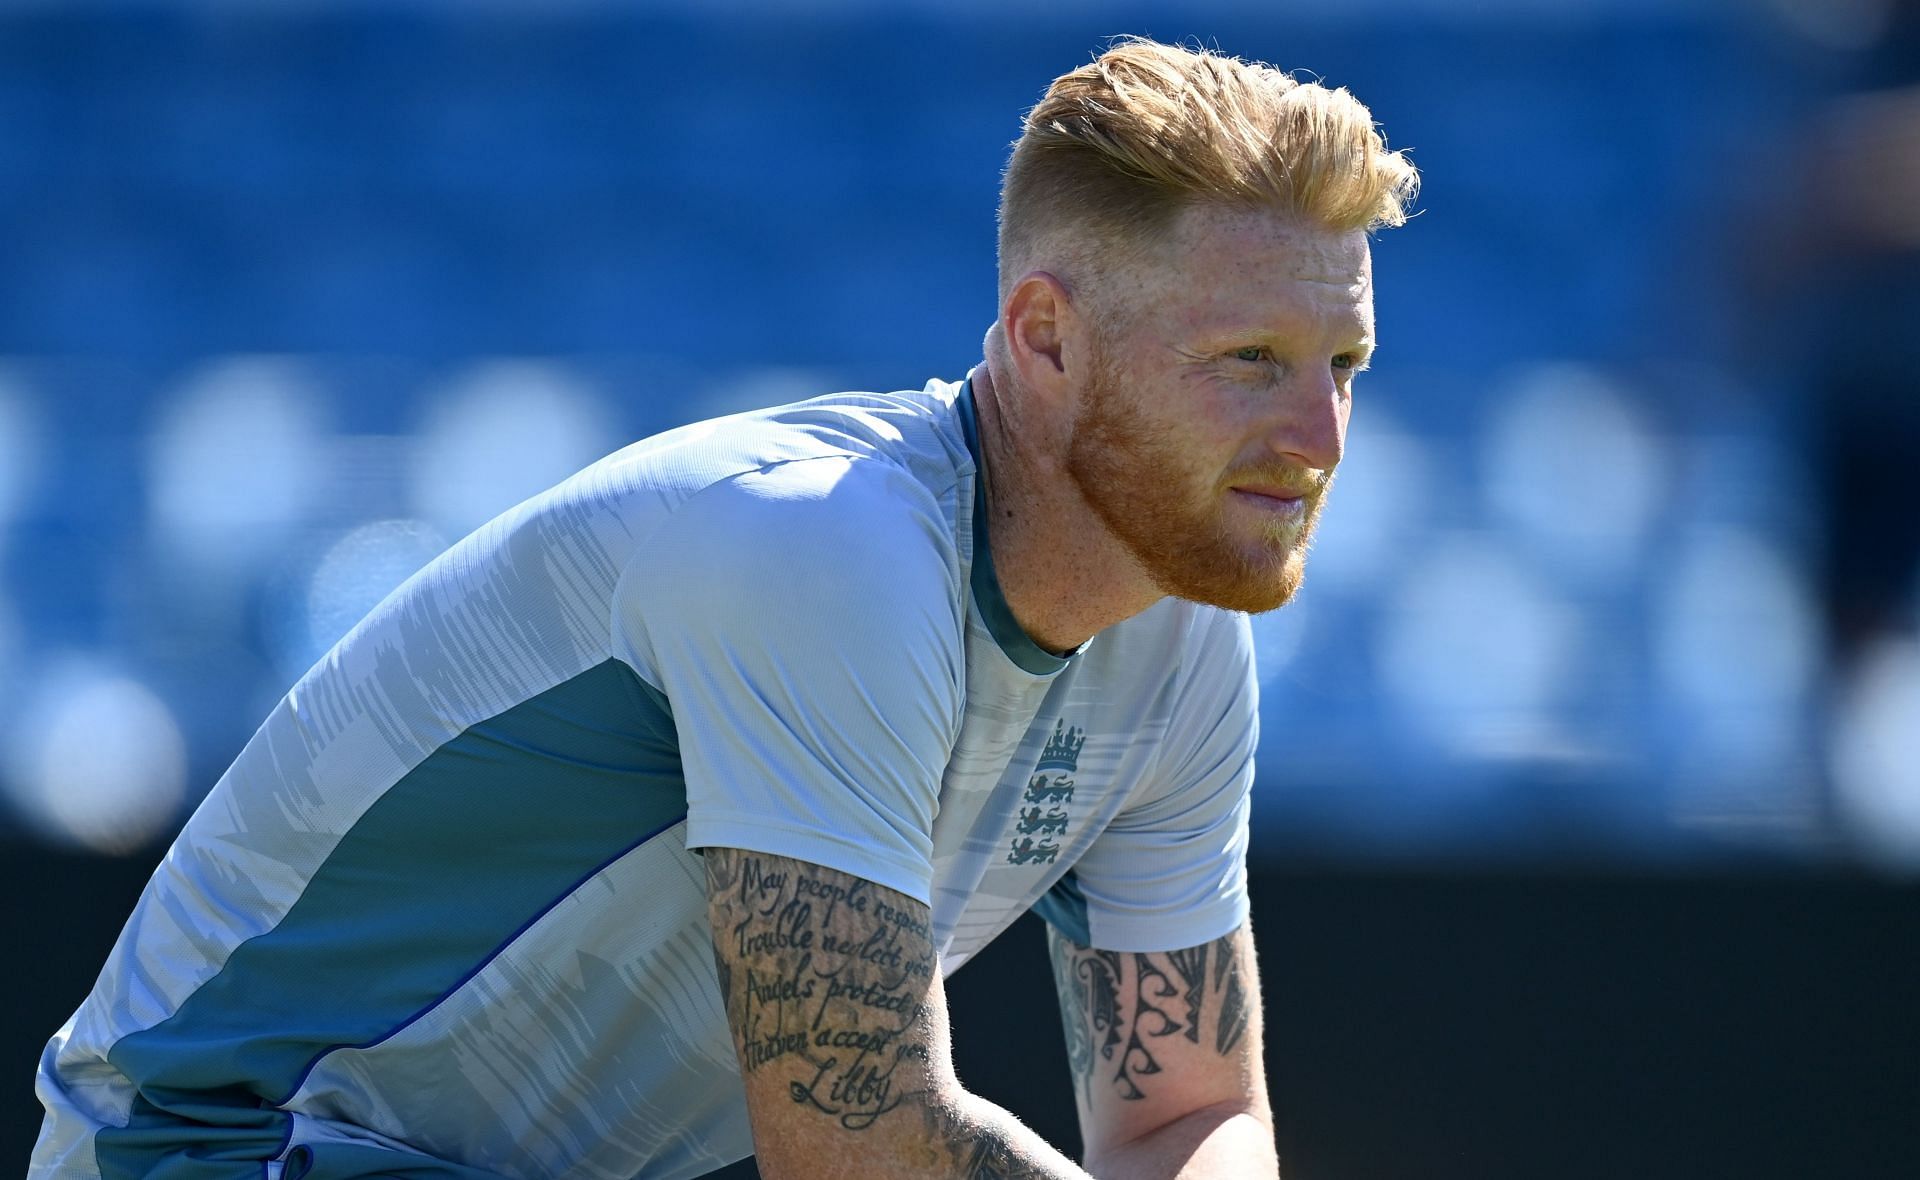 Ben Stokes will be keen for a 3-0 whitewash against New Zealand. (Image Credits: Getty)